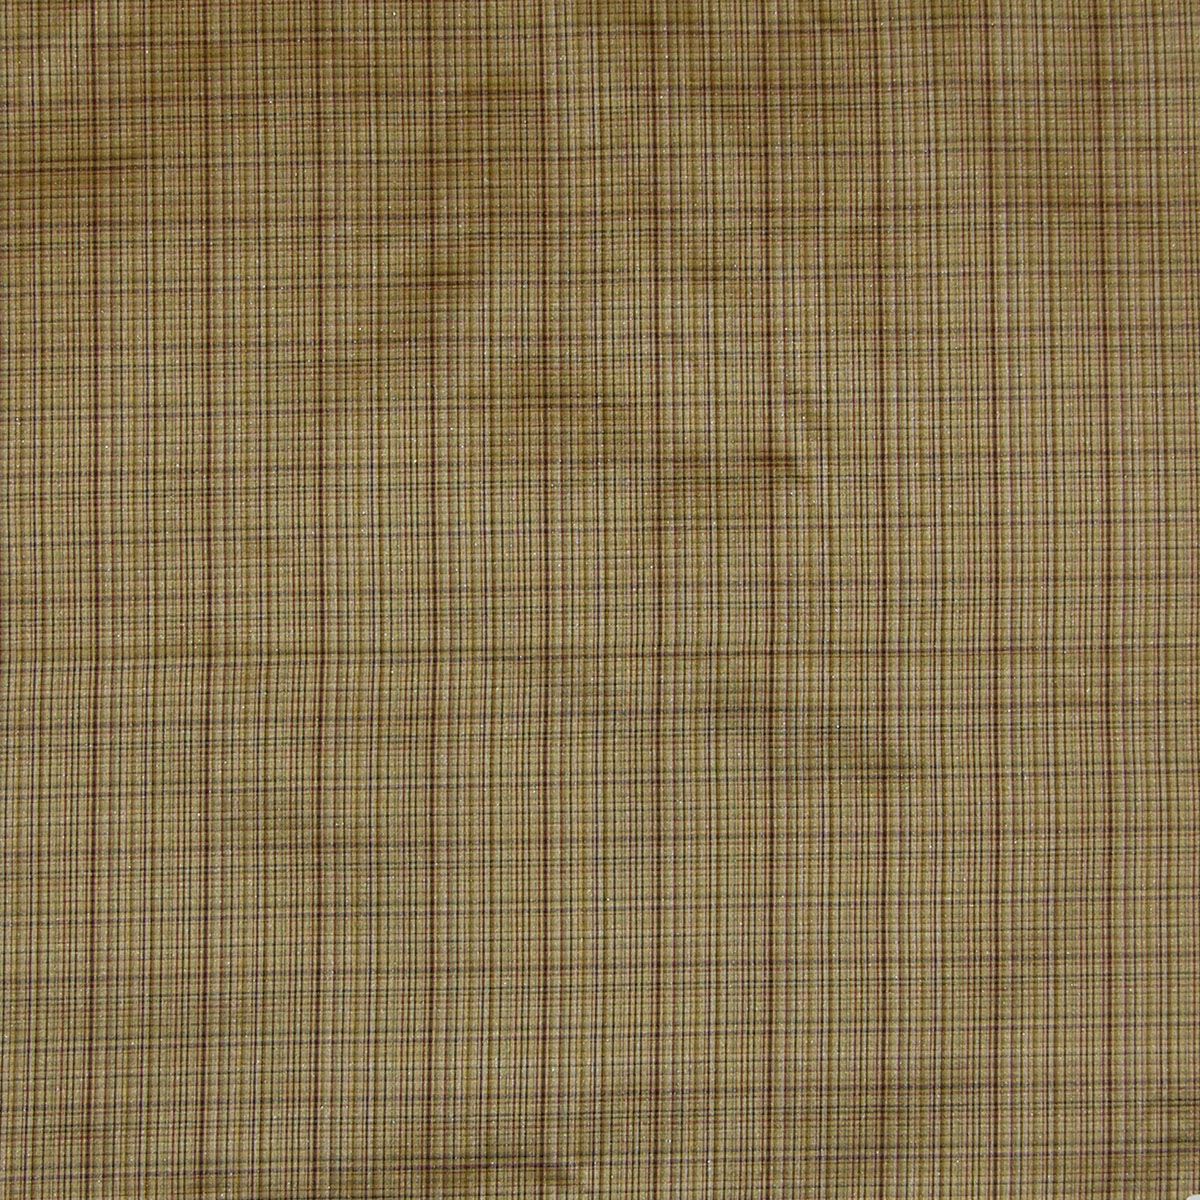 T &amp; A Check fabric in rattan color - pattern number SQ 00024308 - by Scalamandre in the Old World Weavers collection